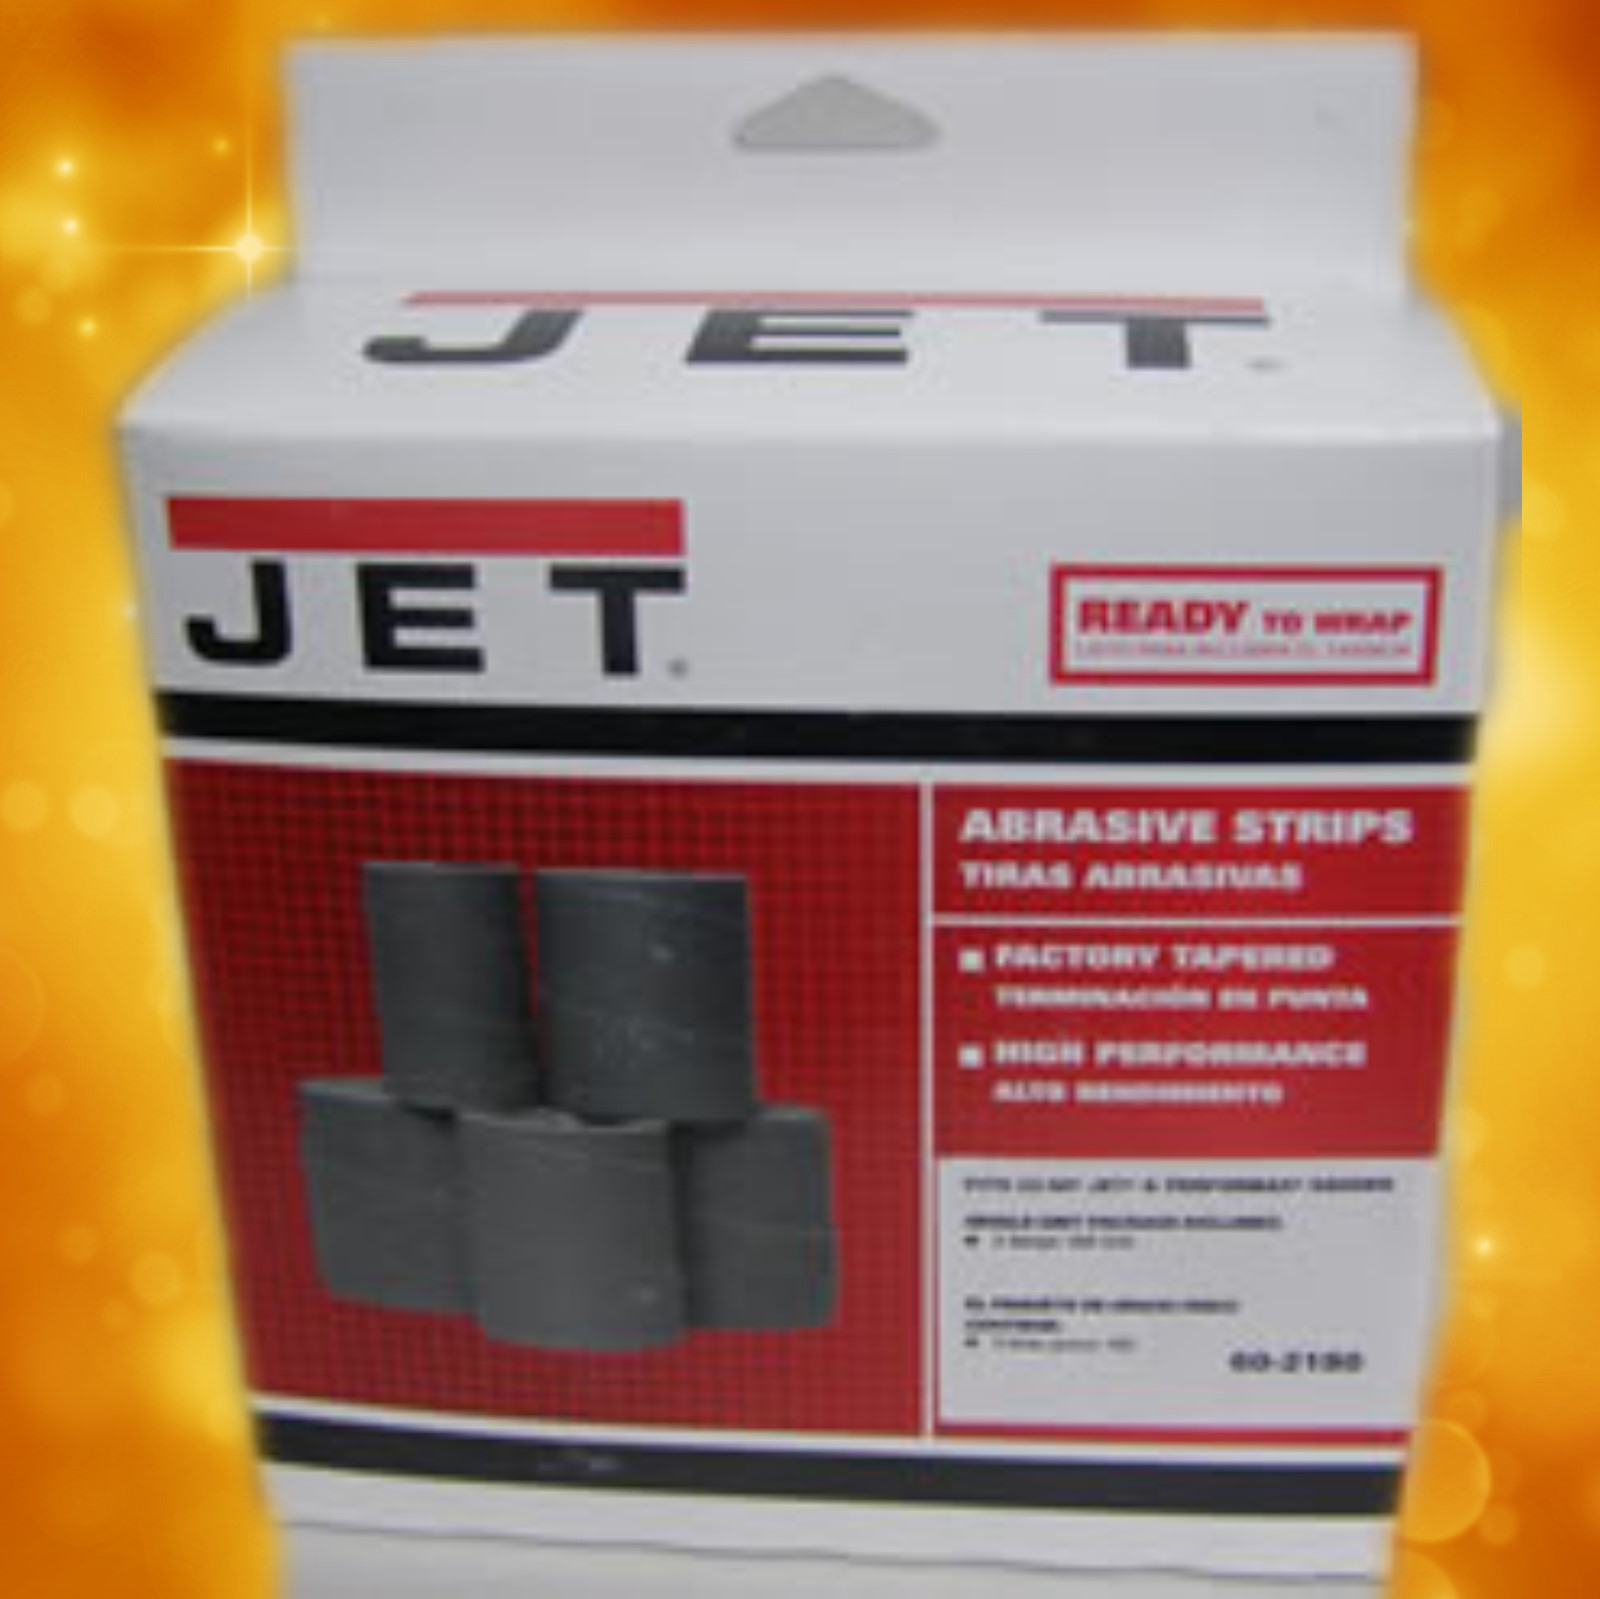 Jet Sand Paper 60-2180 Ready-To-Wrap Abrasives, 180 grit, 3-wraps in Box for 22-44 60-2180